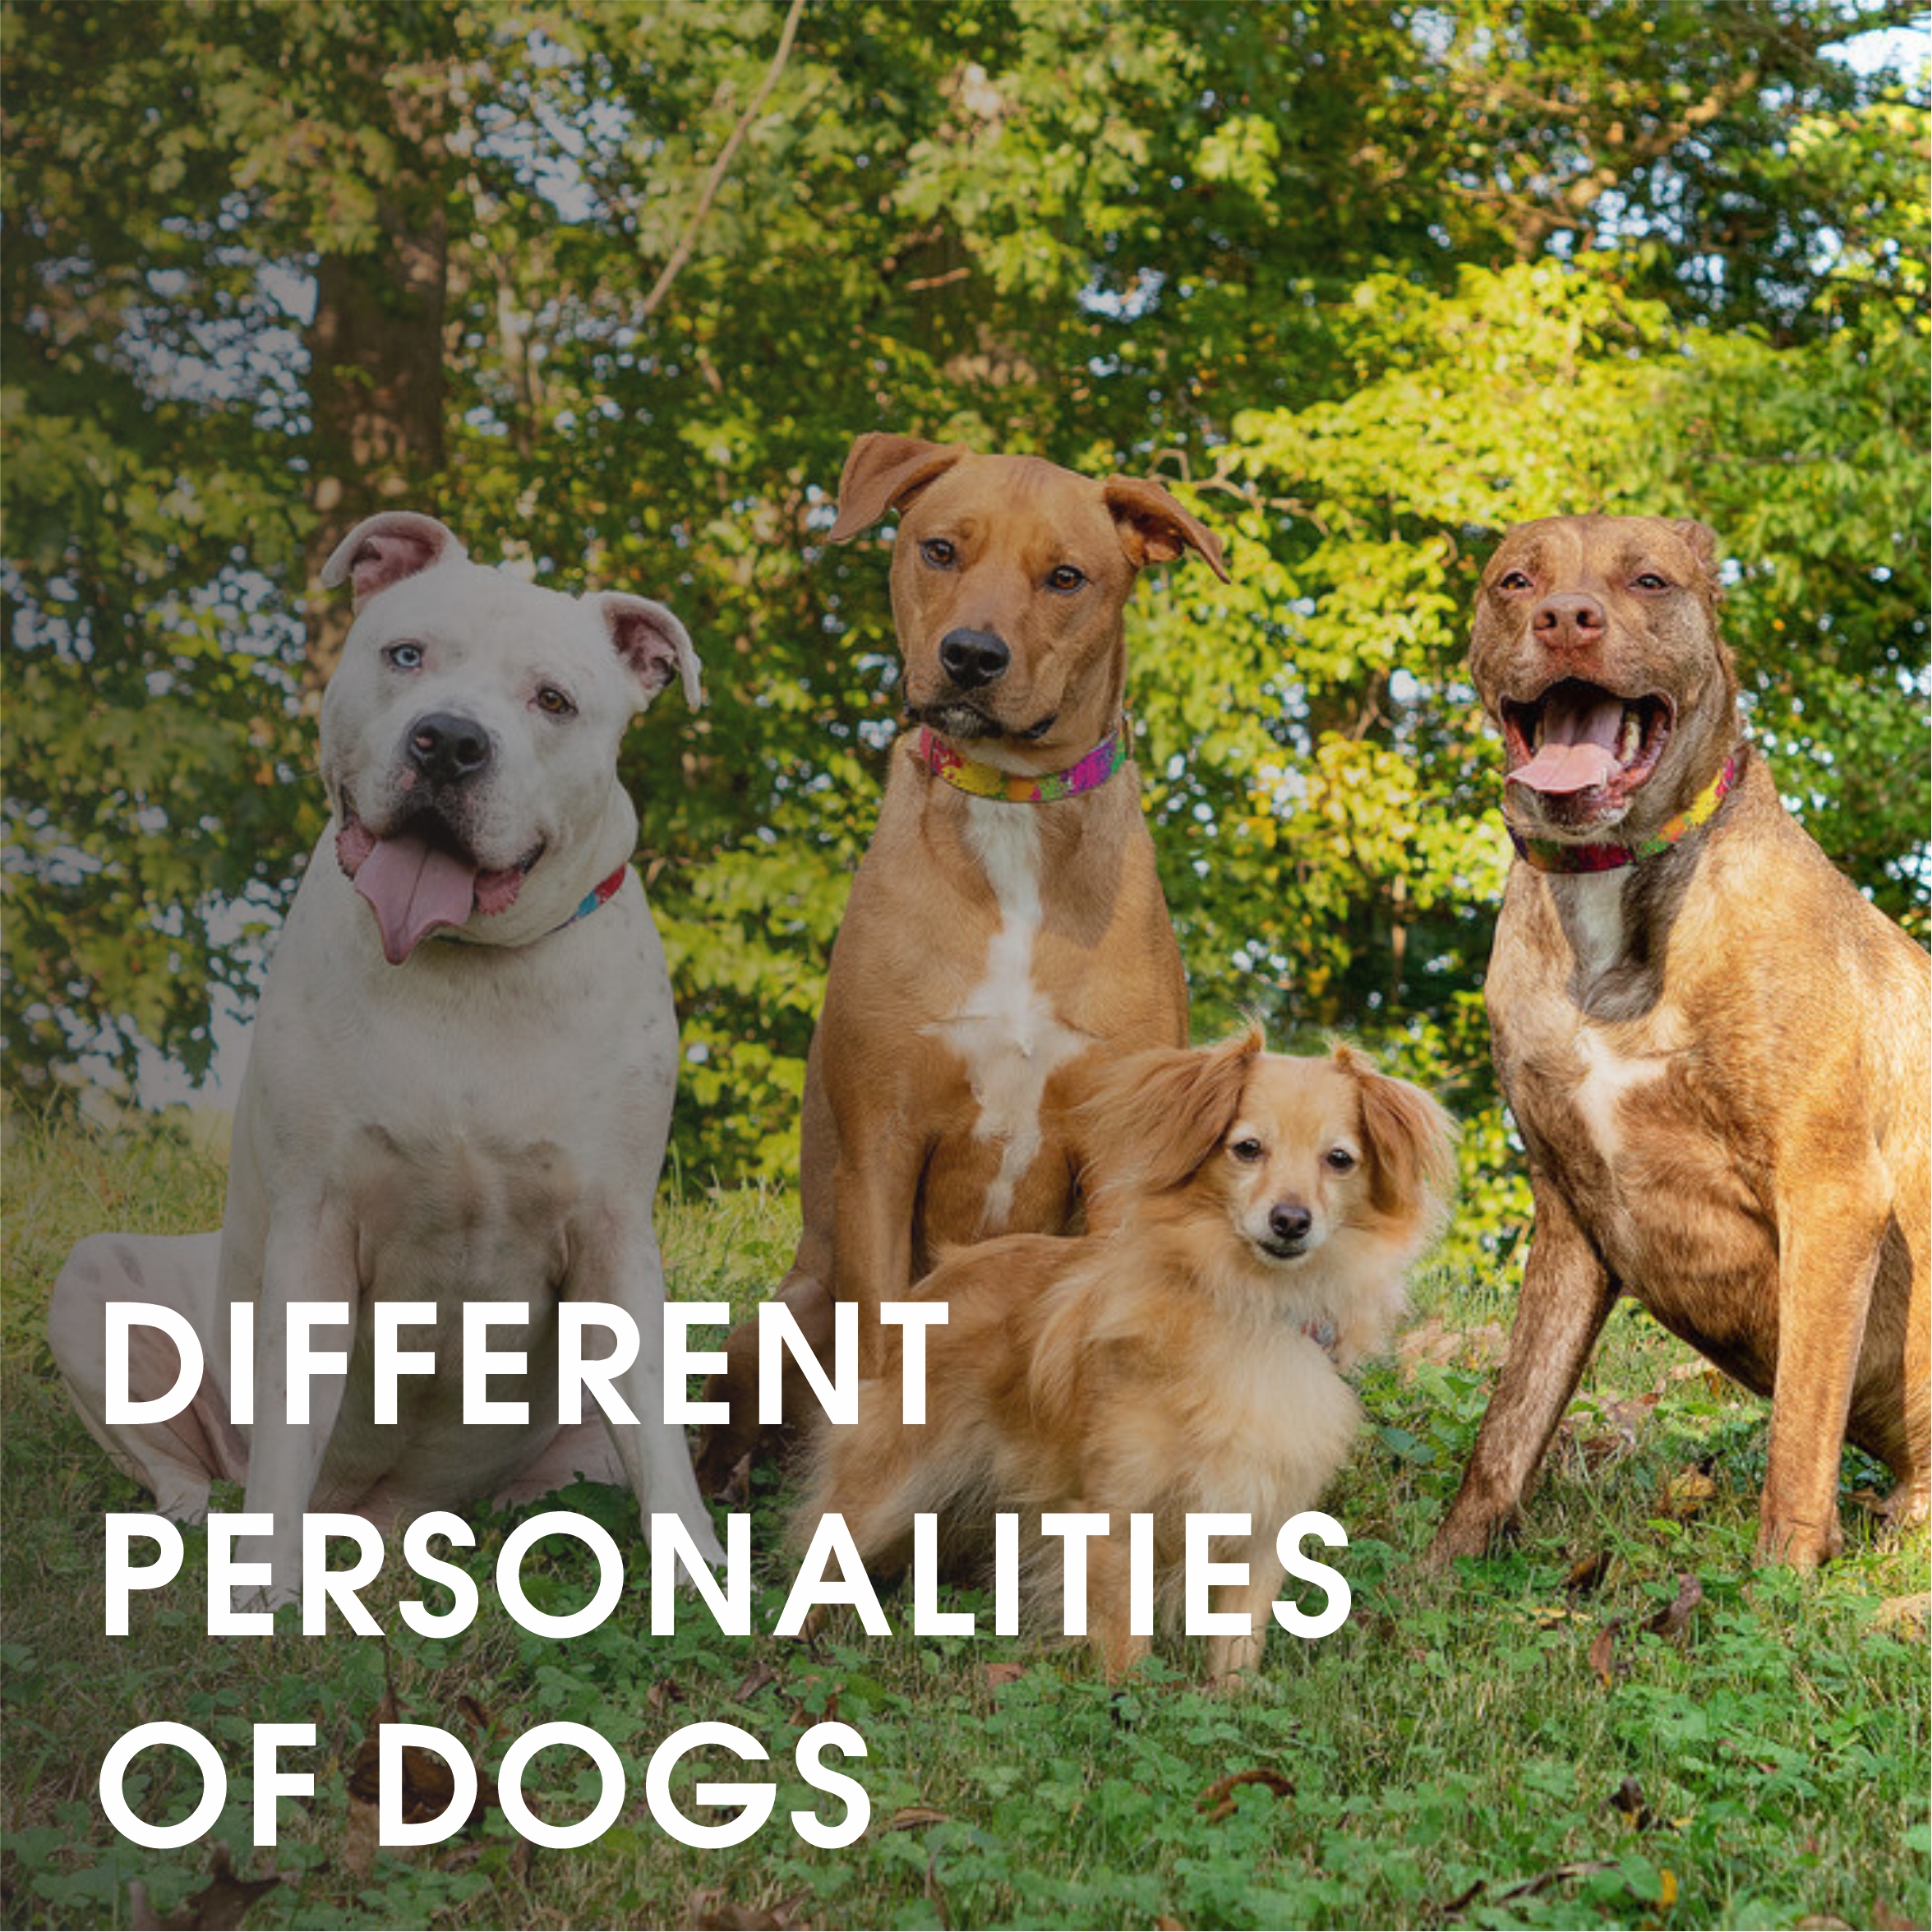 Different personlities of dogs